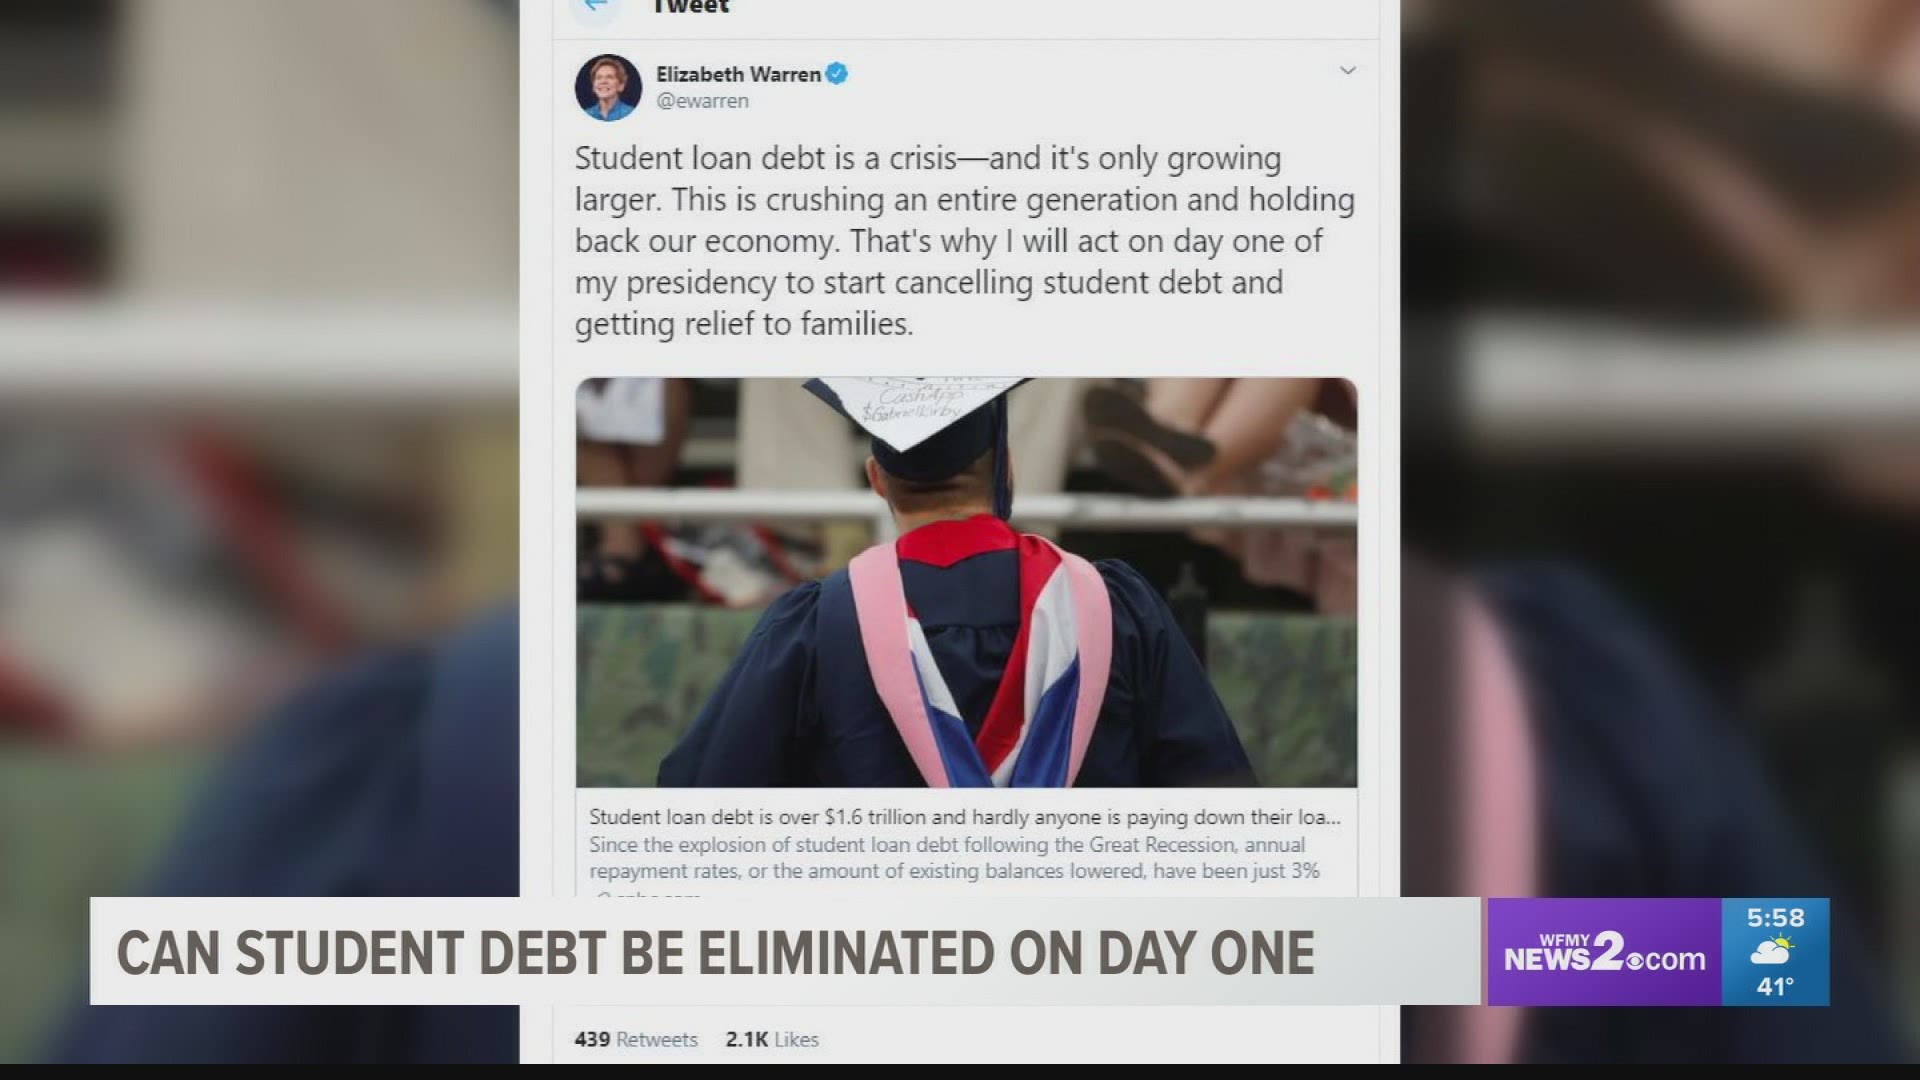 Senator Elizabeth Warren says she would eliminate student debt on the first day. Is that possible?